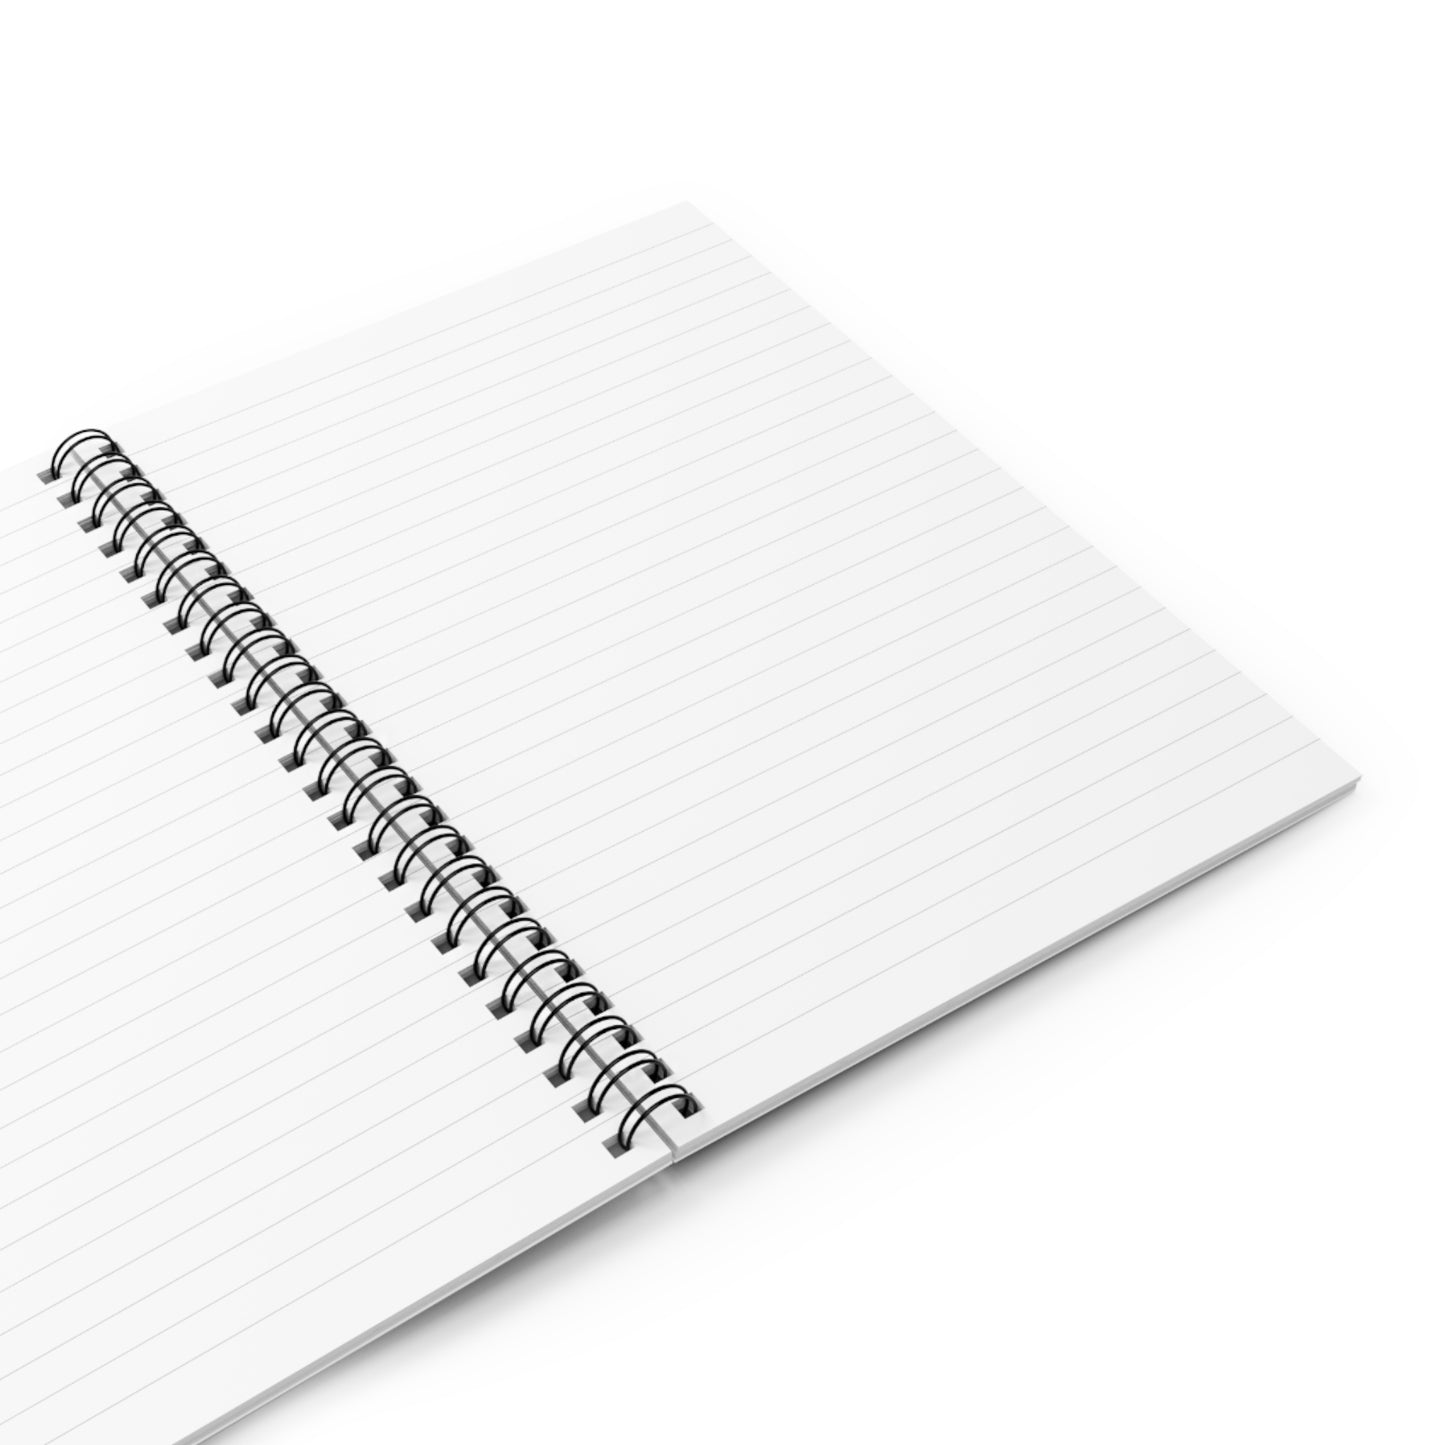 To Do List: Spiral Notebook - Log Books - Journals - Diaries - and More Custom Printed by TheGlassyLass